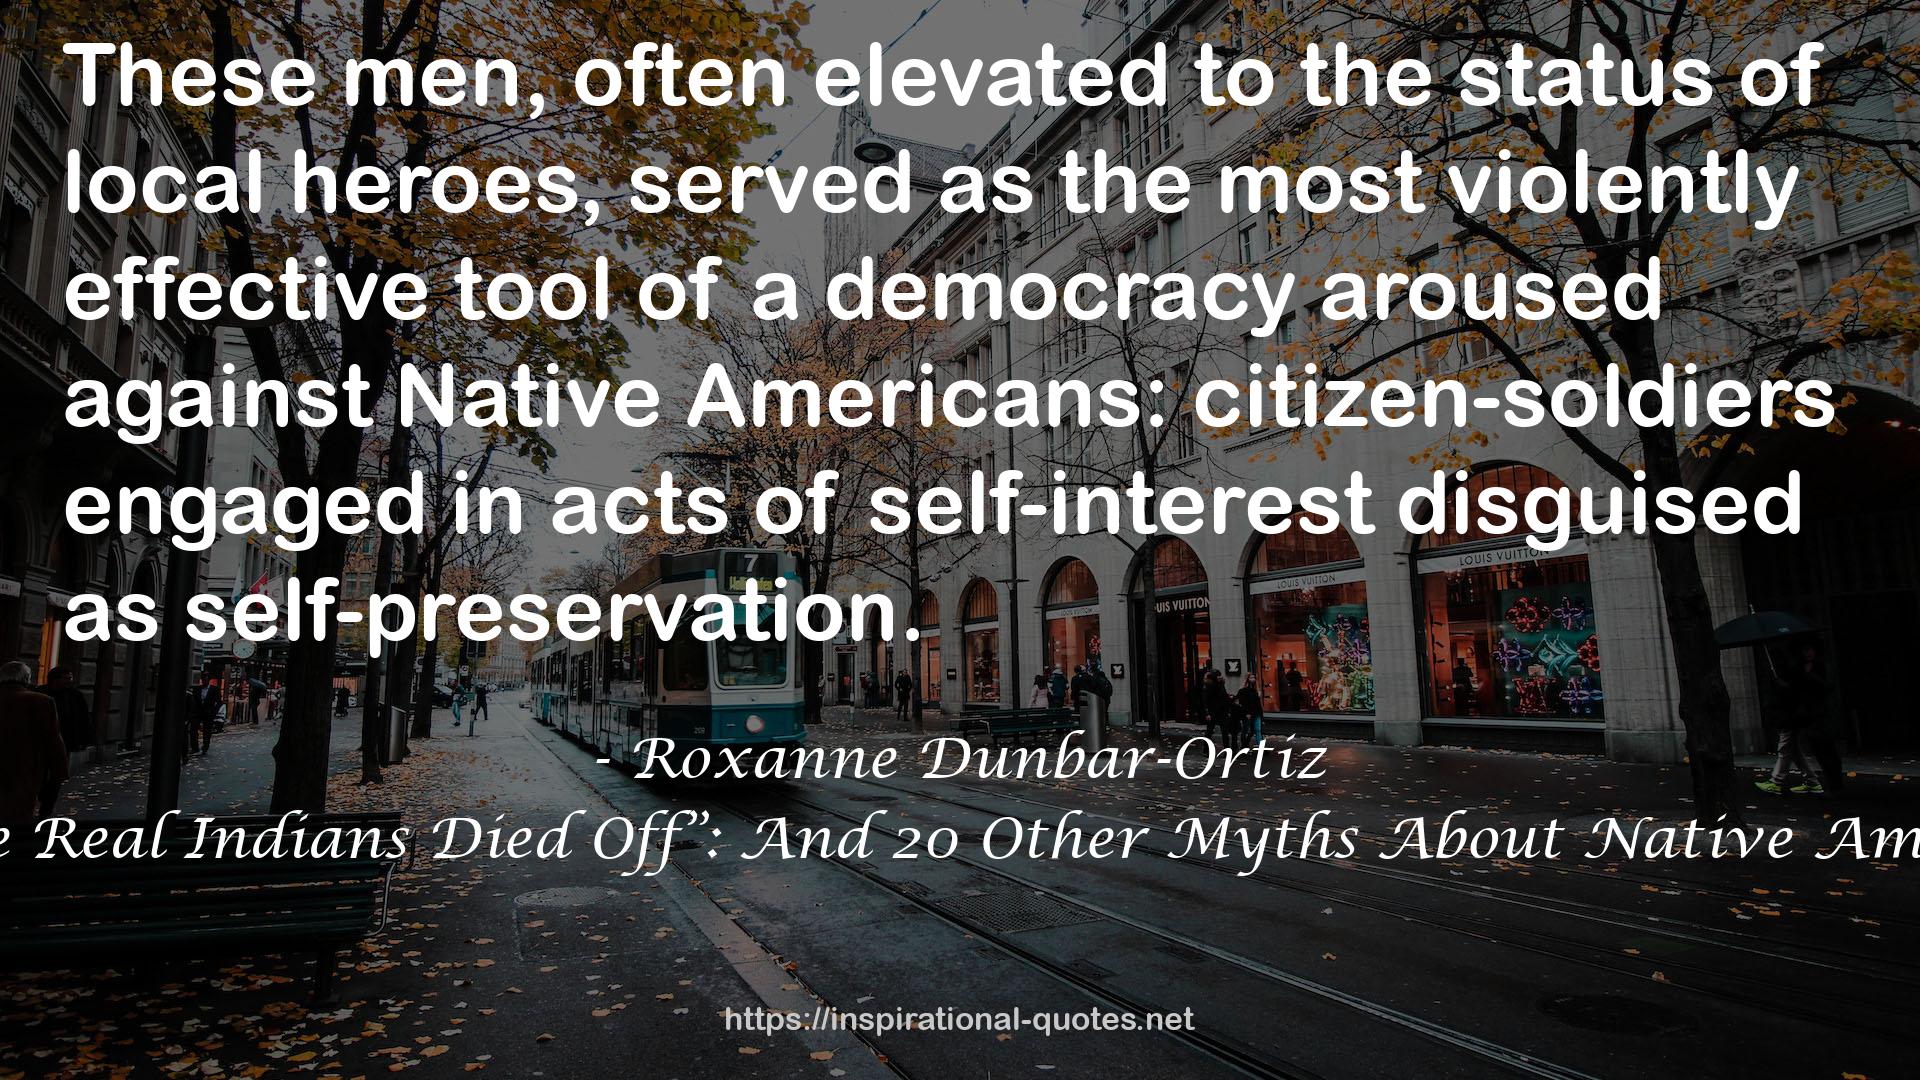 “All the Real Indians Died Off”: And 20 Other Myths About Native Americans QUOTES